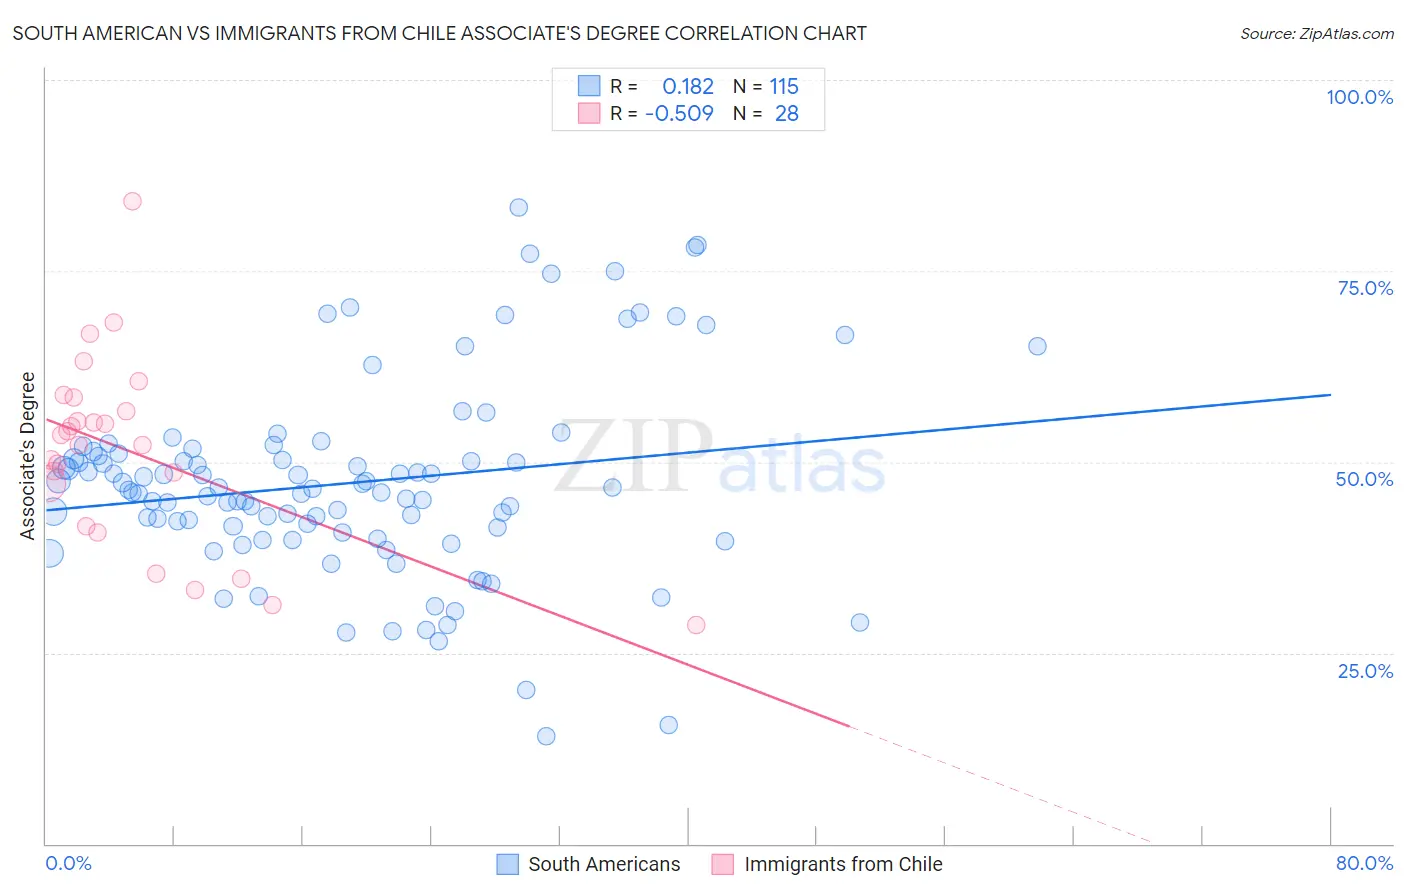 South American vs Immigrants from Chile Associate's Degree